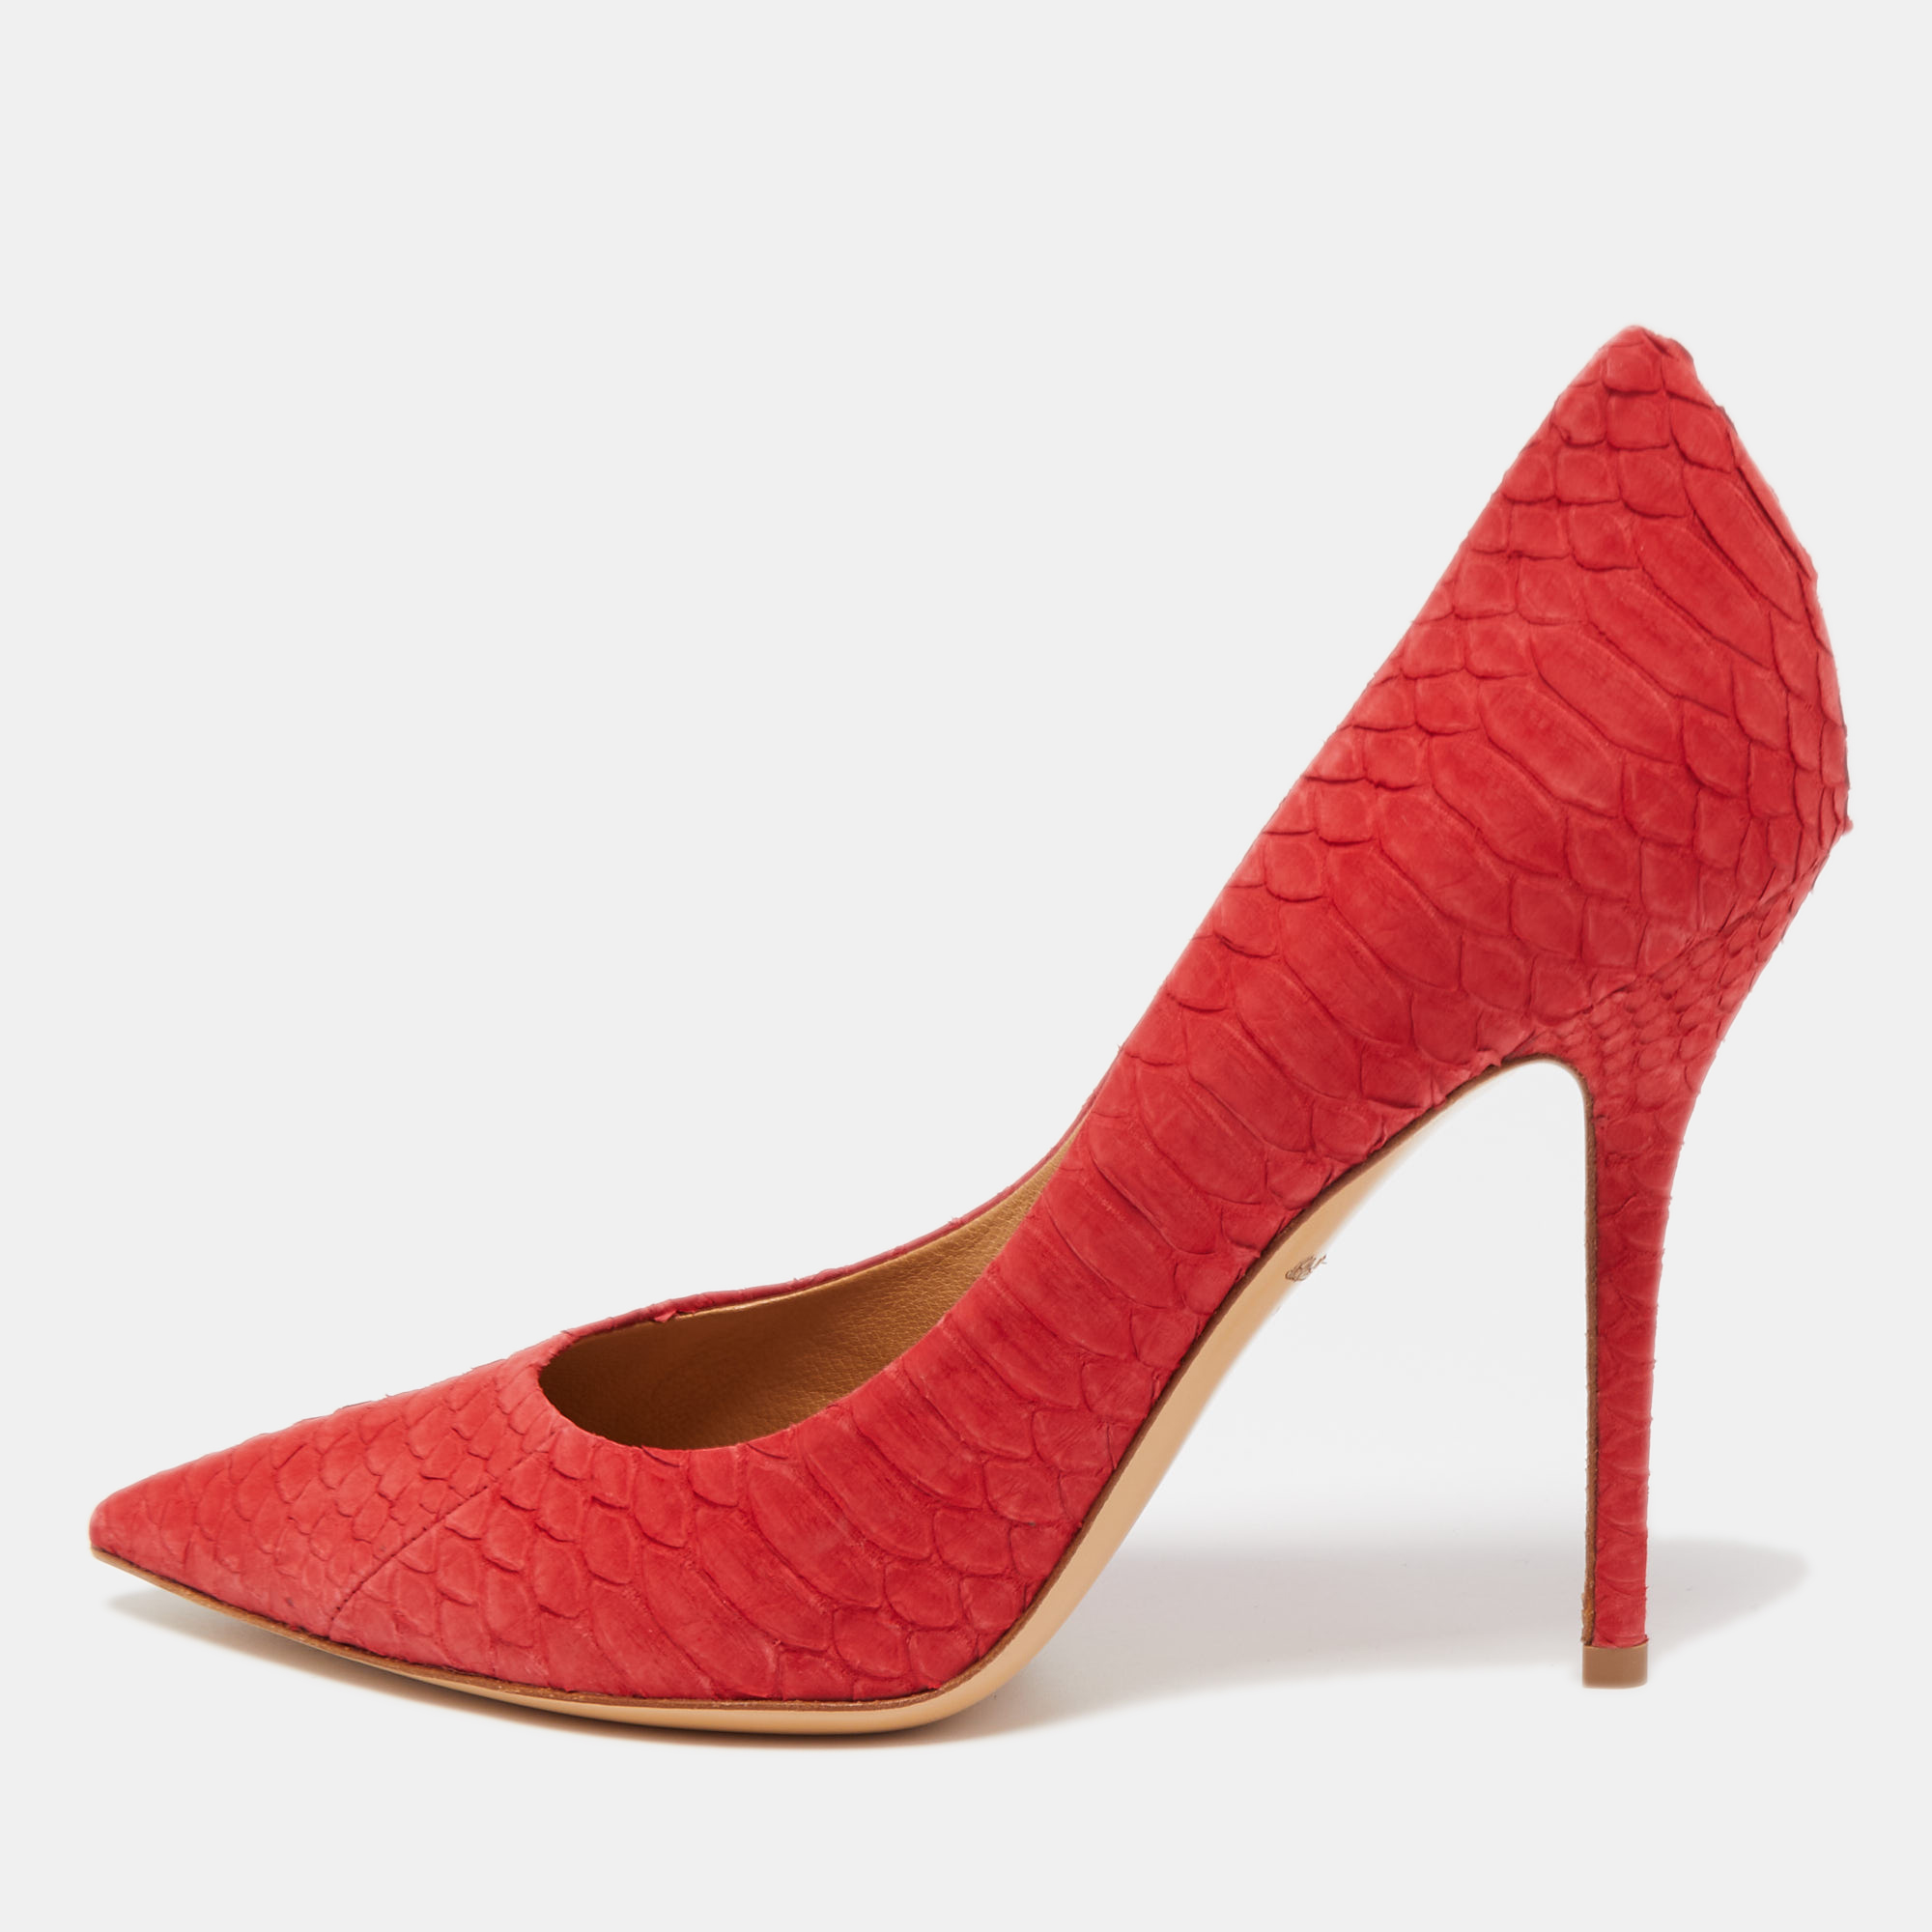 The Salvatore Ferragamo pumps are luxurious and stylish womens shoes. Crafted with red python skin they feature a pointed toe design and a slim stiletto heel exuding timeless elegance and sophistication.